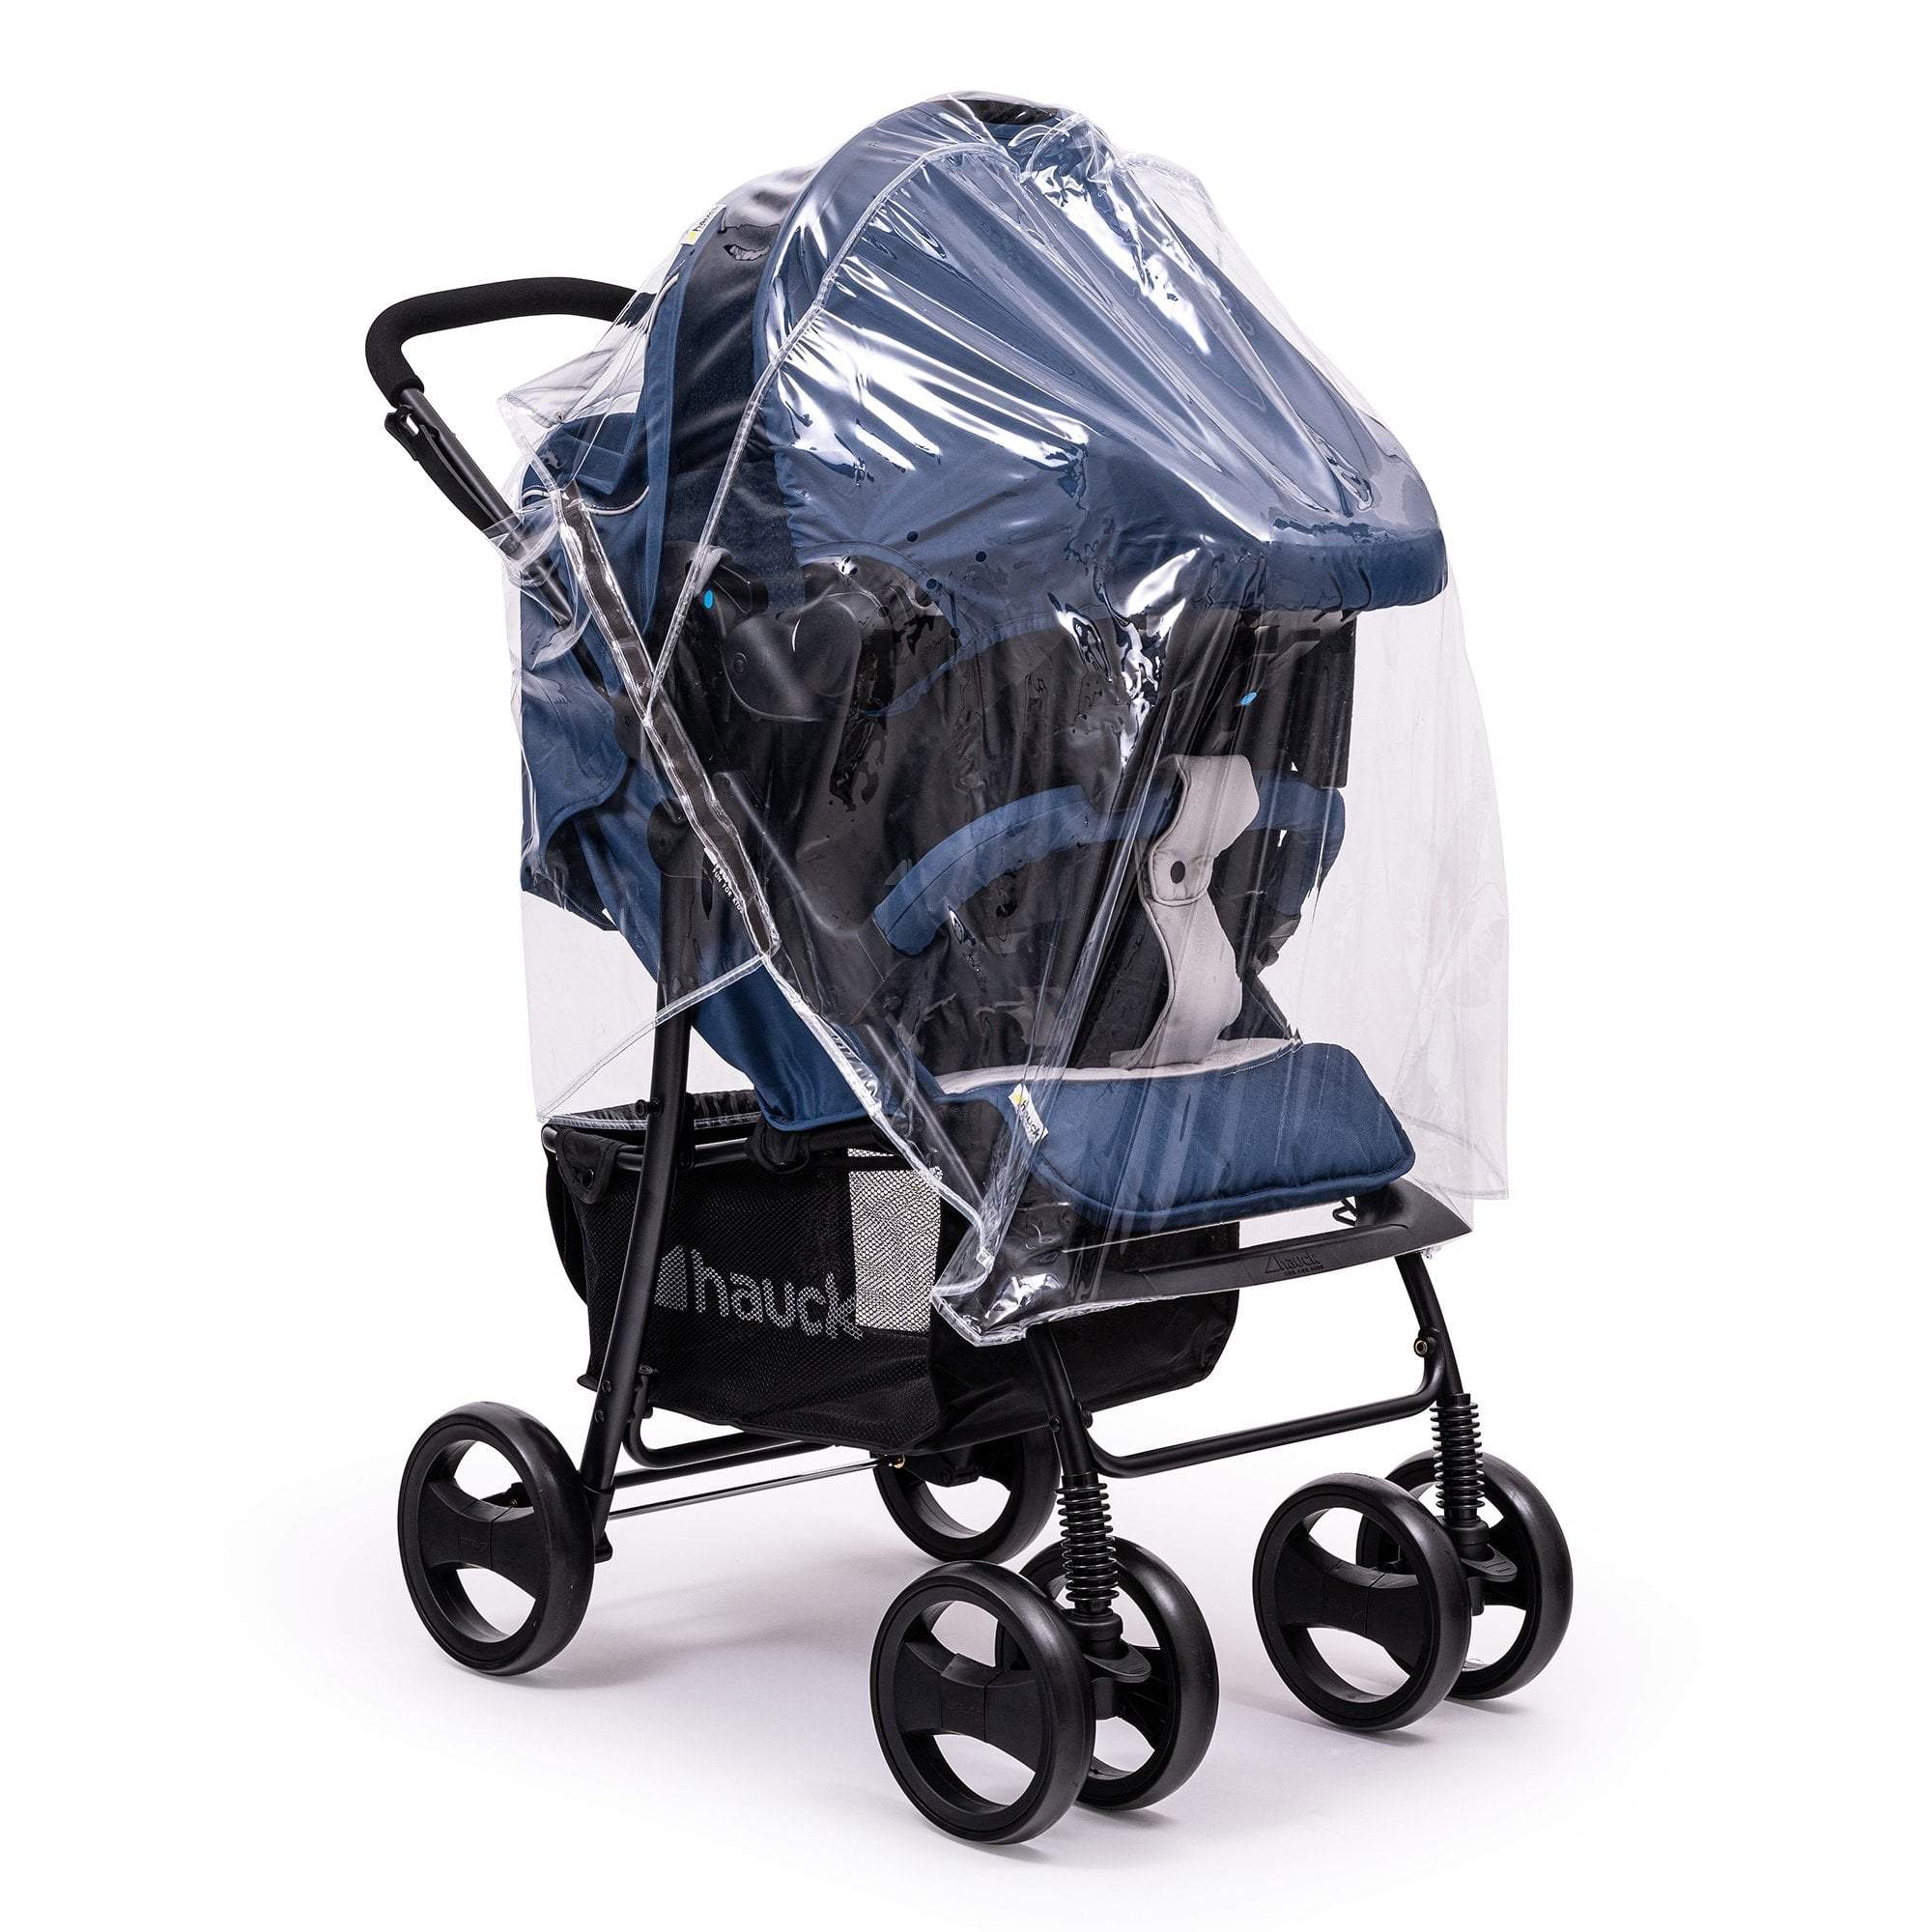 Travel System Raincover Compatible with Zeta - Fits All Models -  | For Your Little One